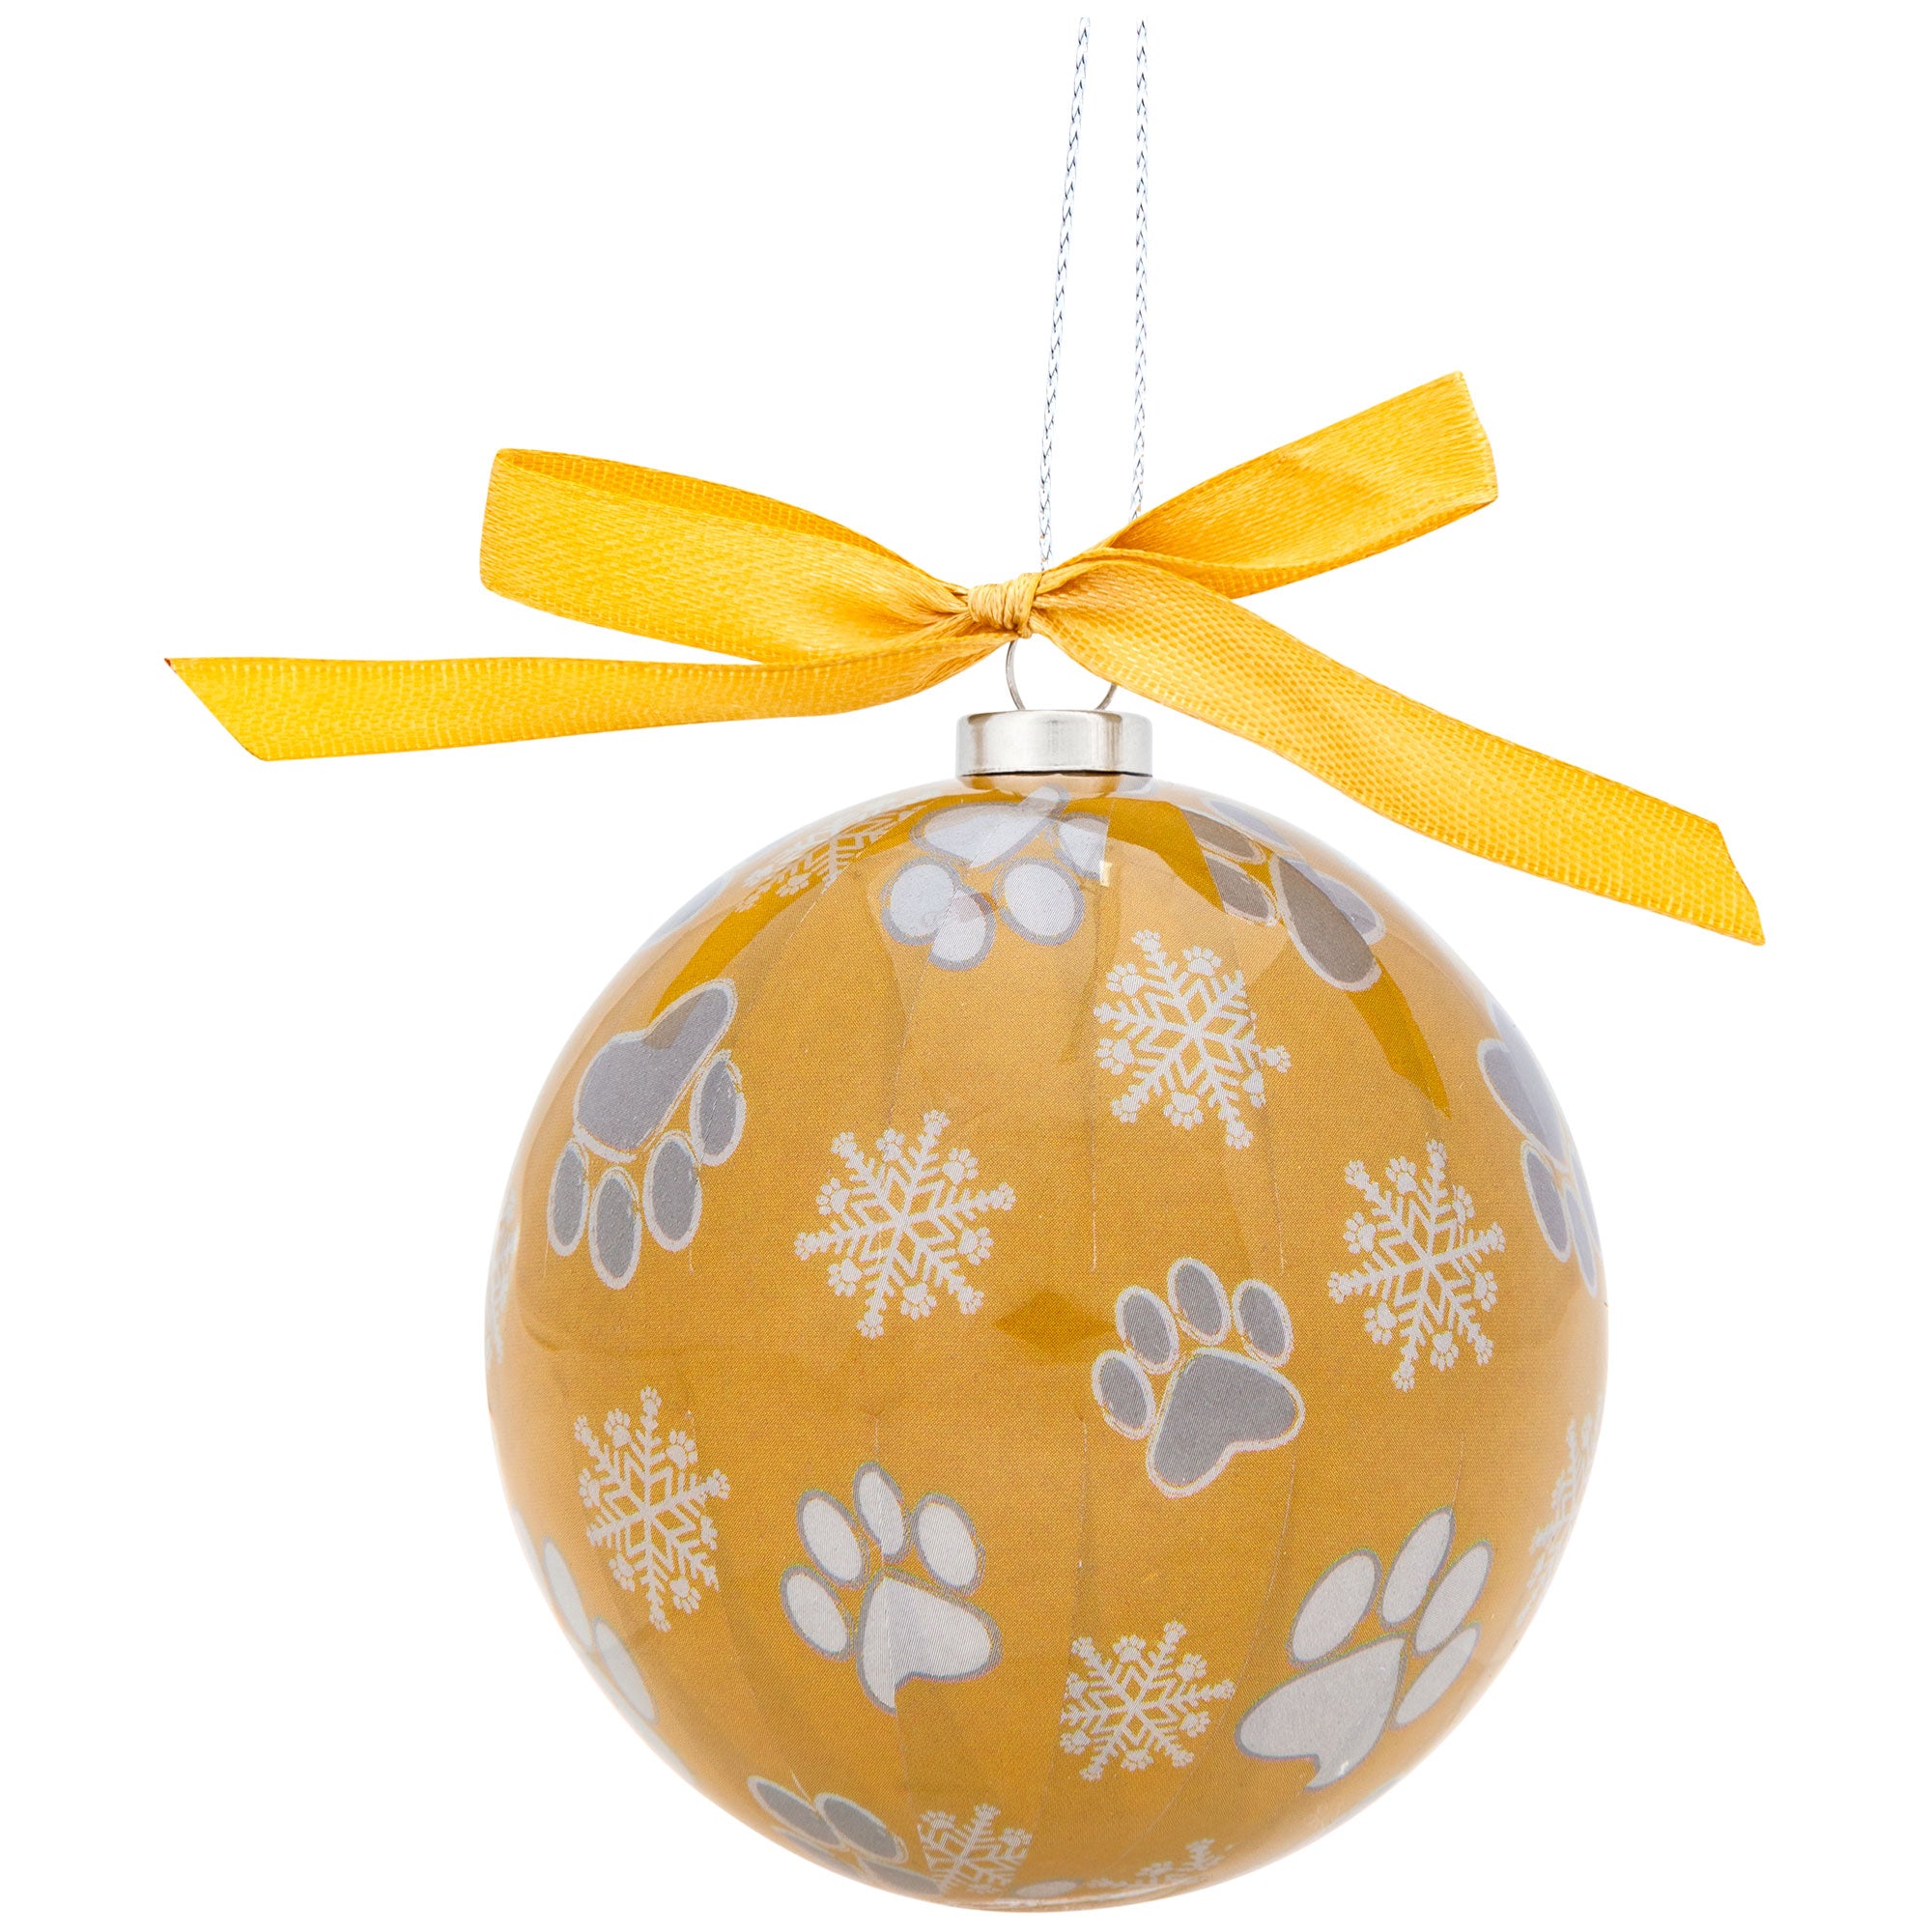 Silver Paws Ornaments - Set of 6